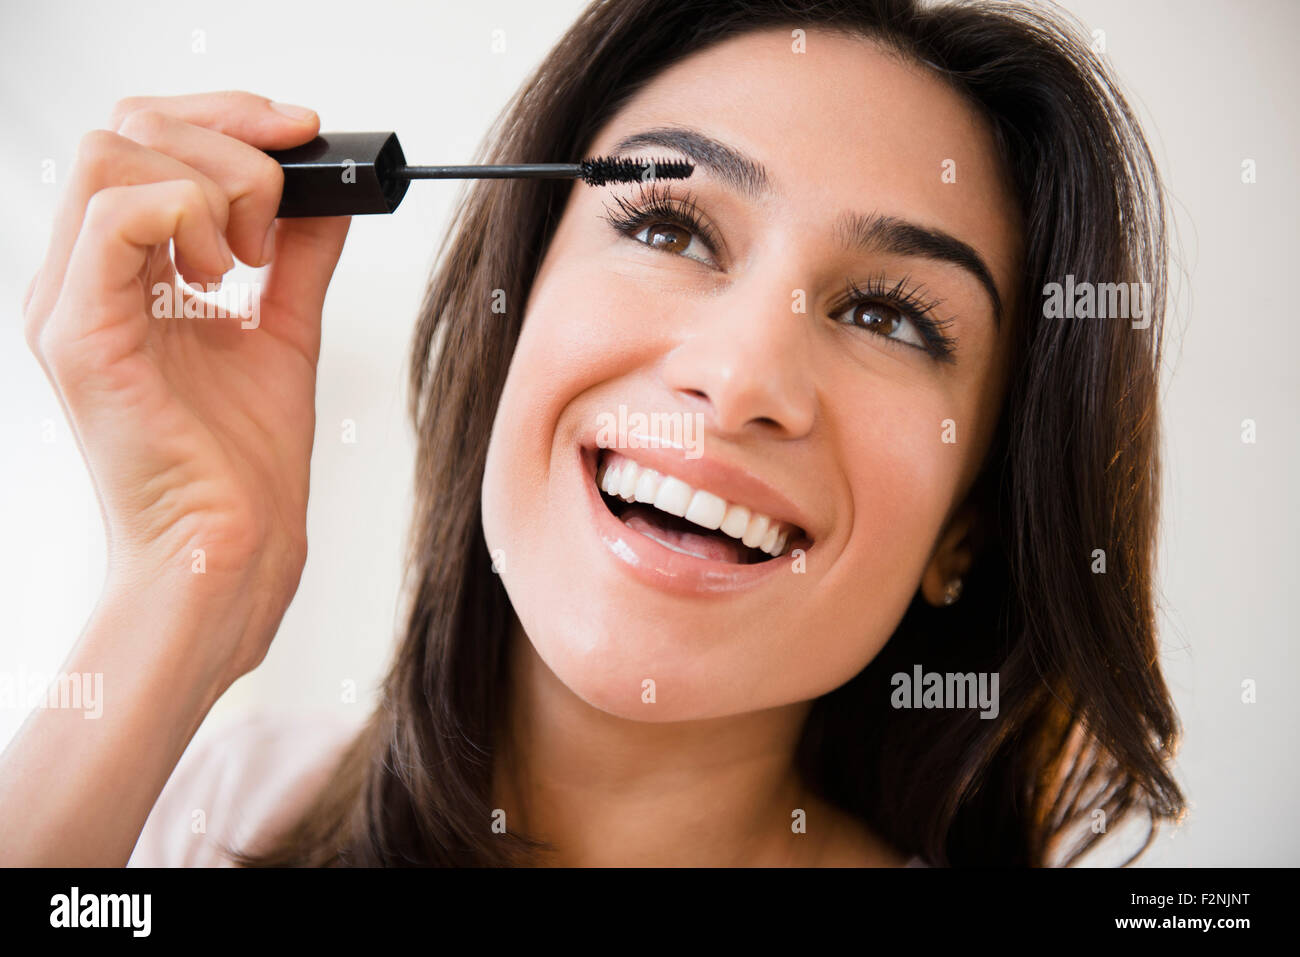 Close up of woman applying makeup Banque D'Images